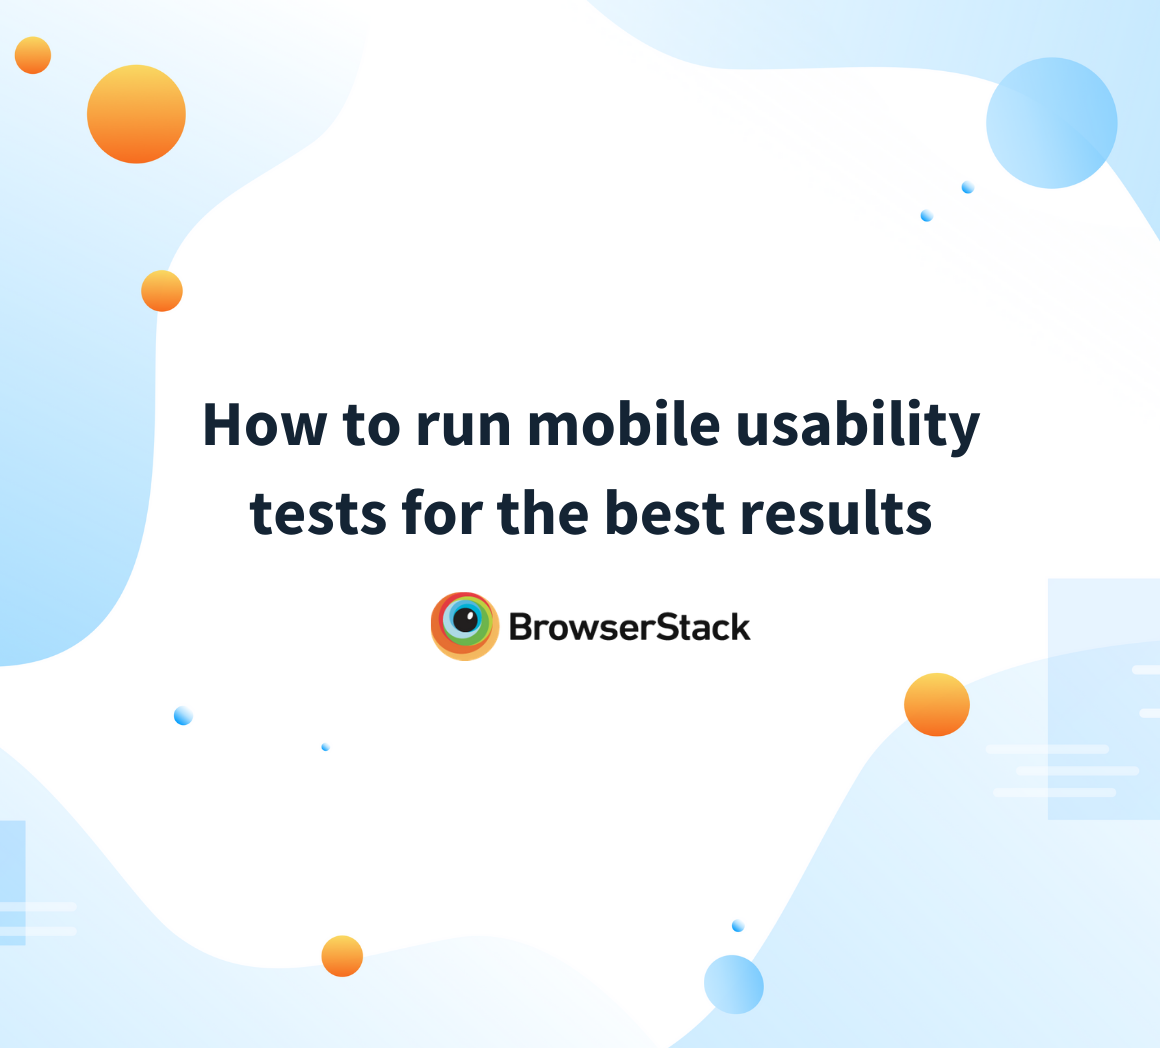 get the most out of mobile usability tests